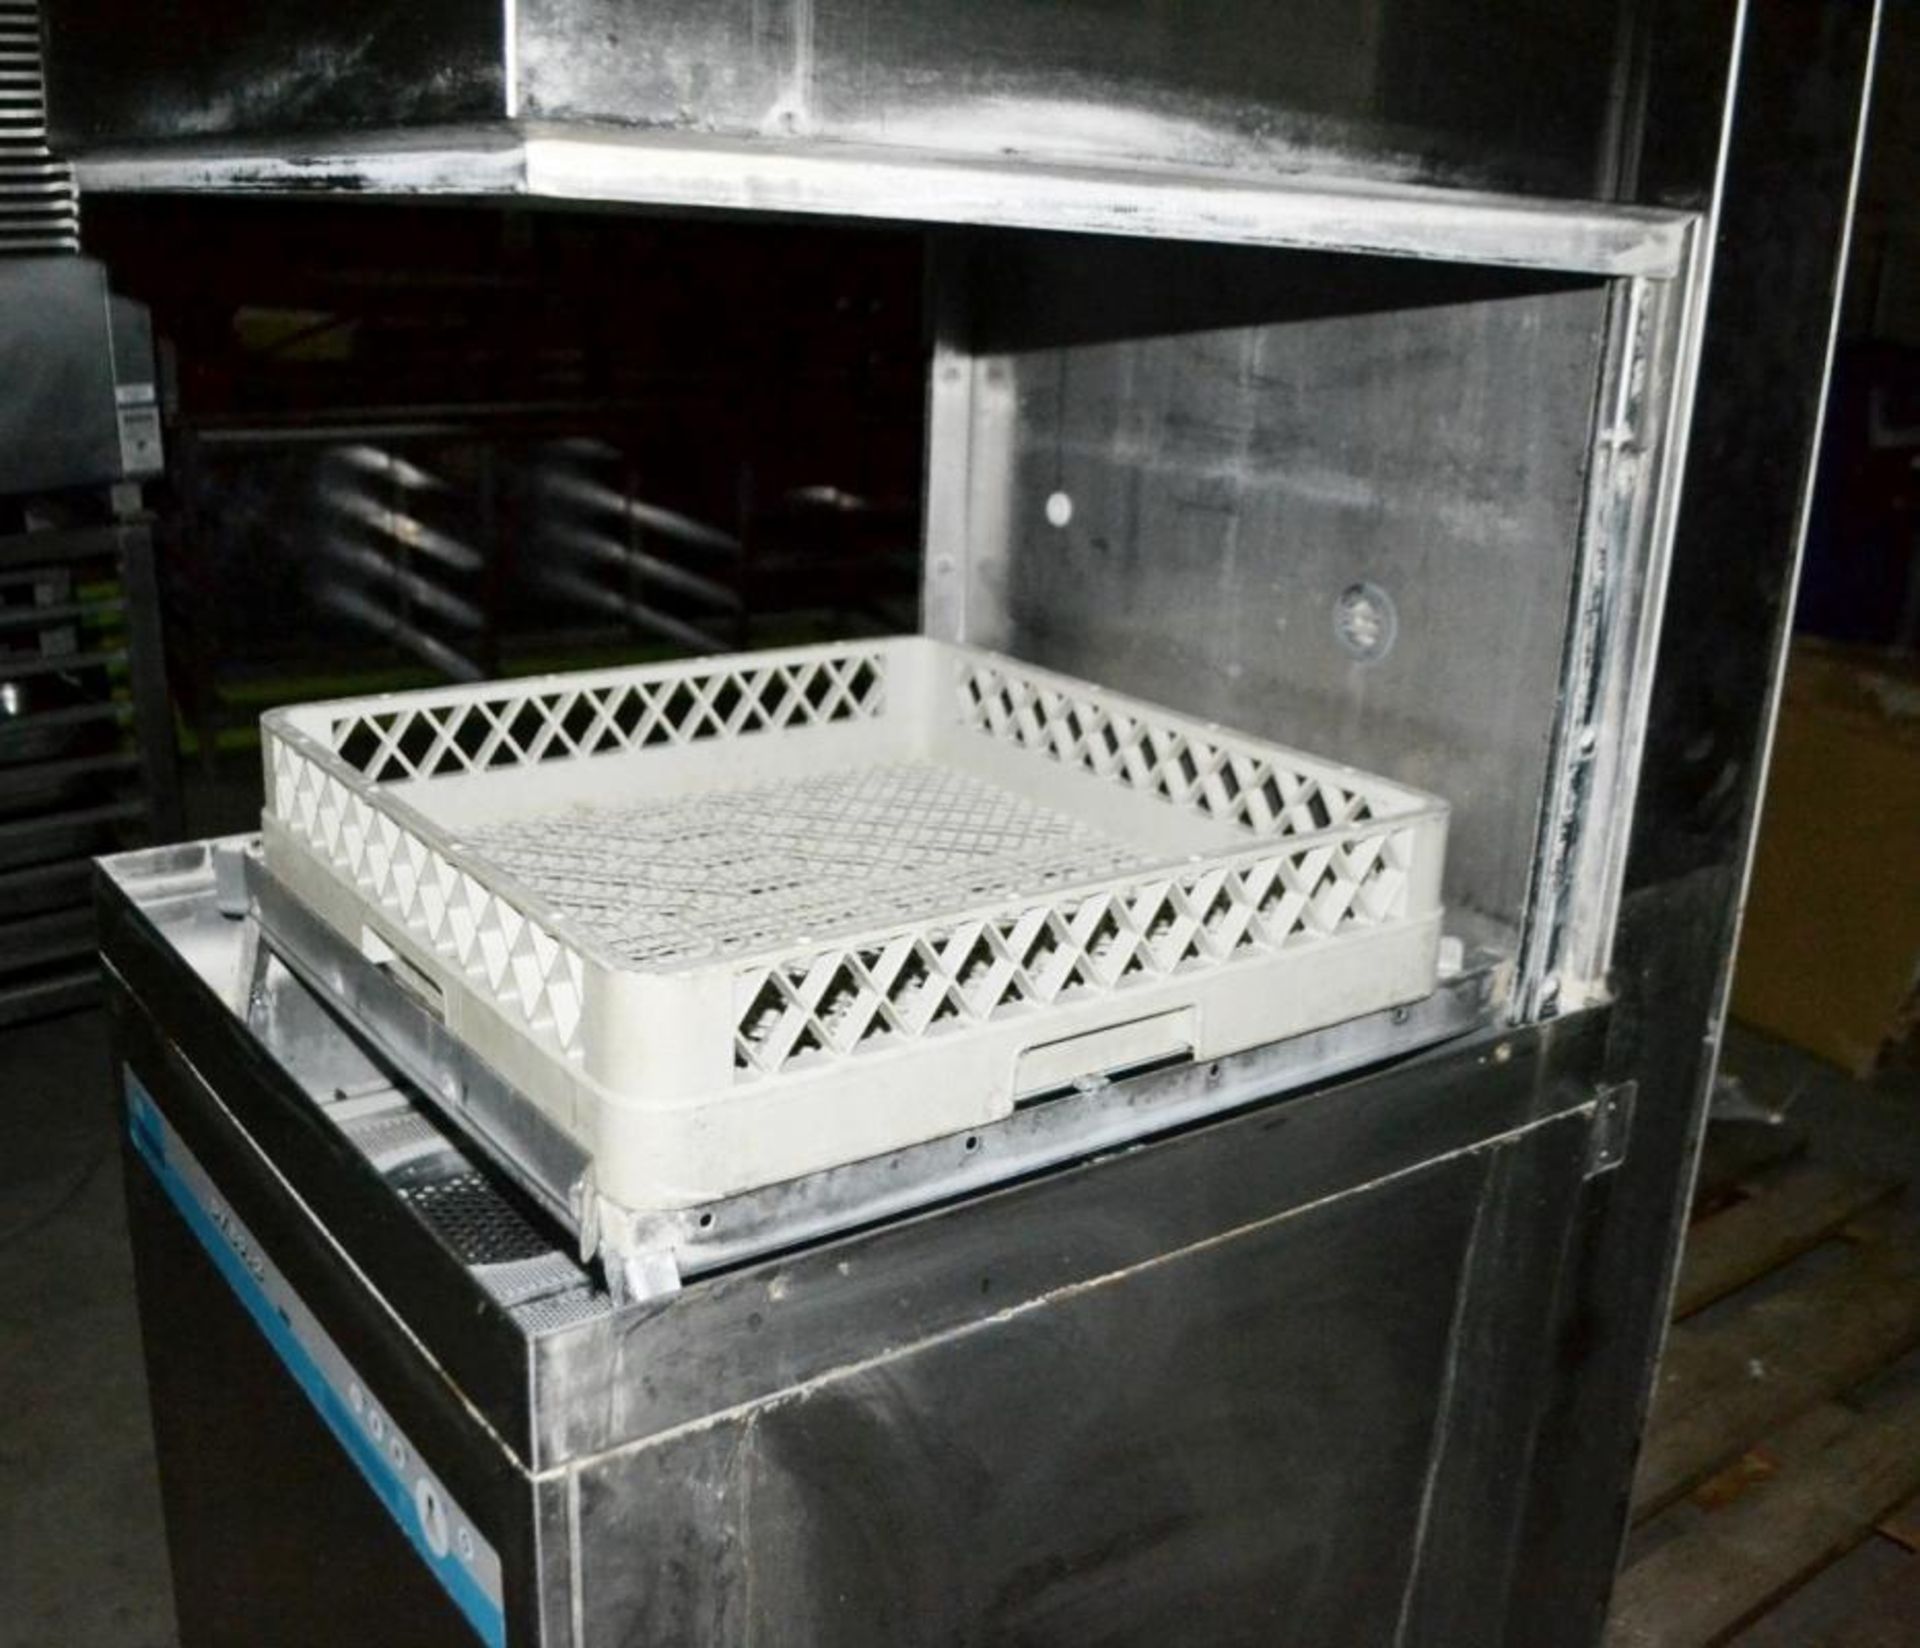 1 x MEIKO DV80.2 Pass Through Commercial Dishwasher - CL011 - Ref: 220 - Location: Altrincham - Image 4 of 5